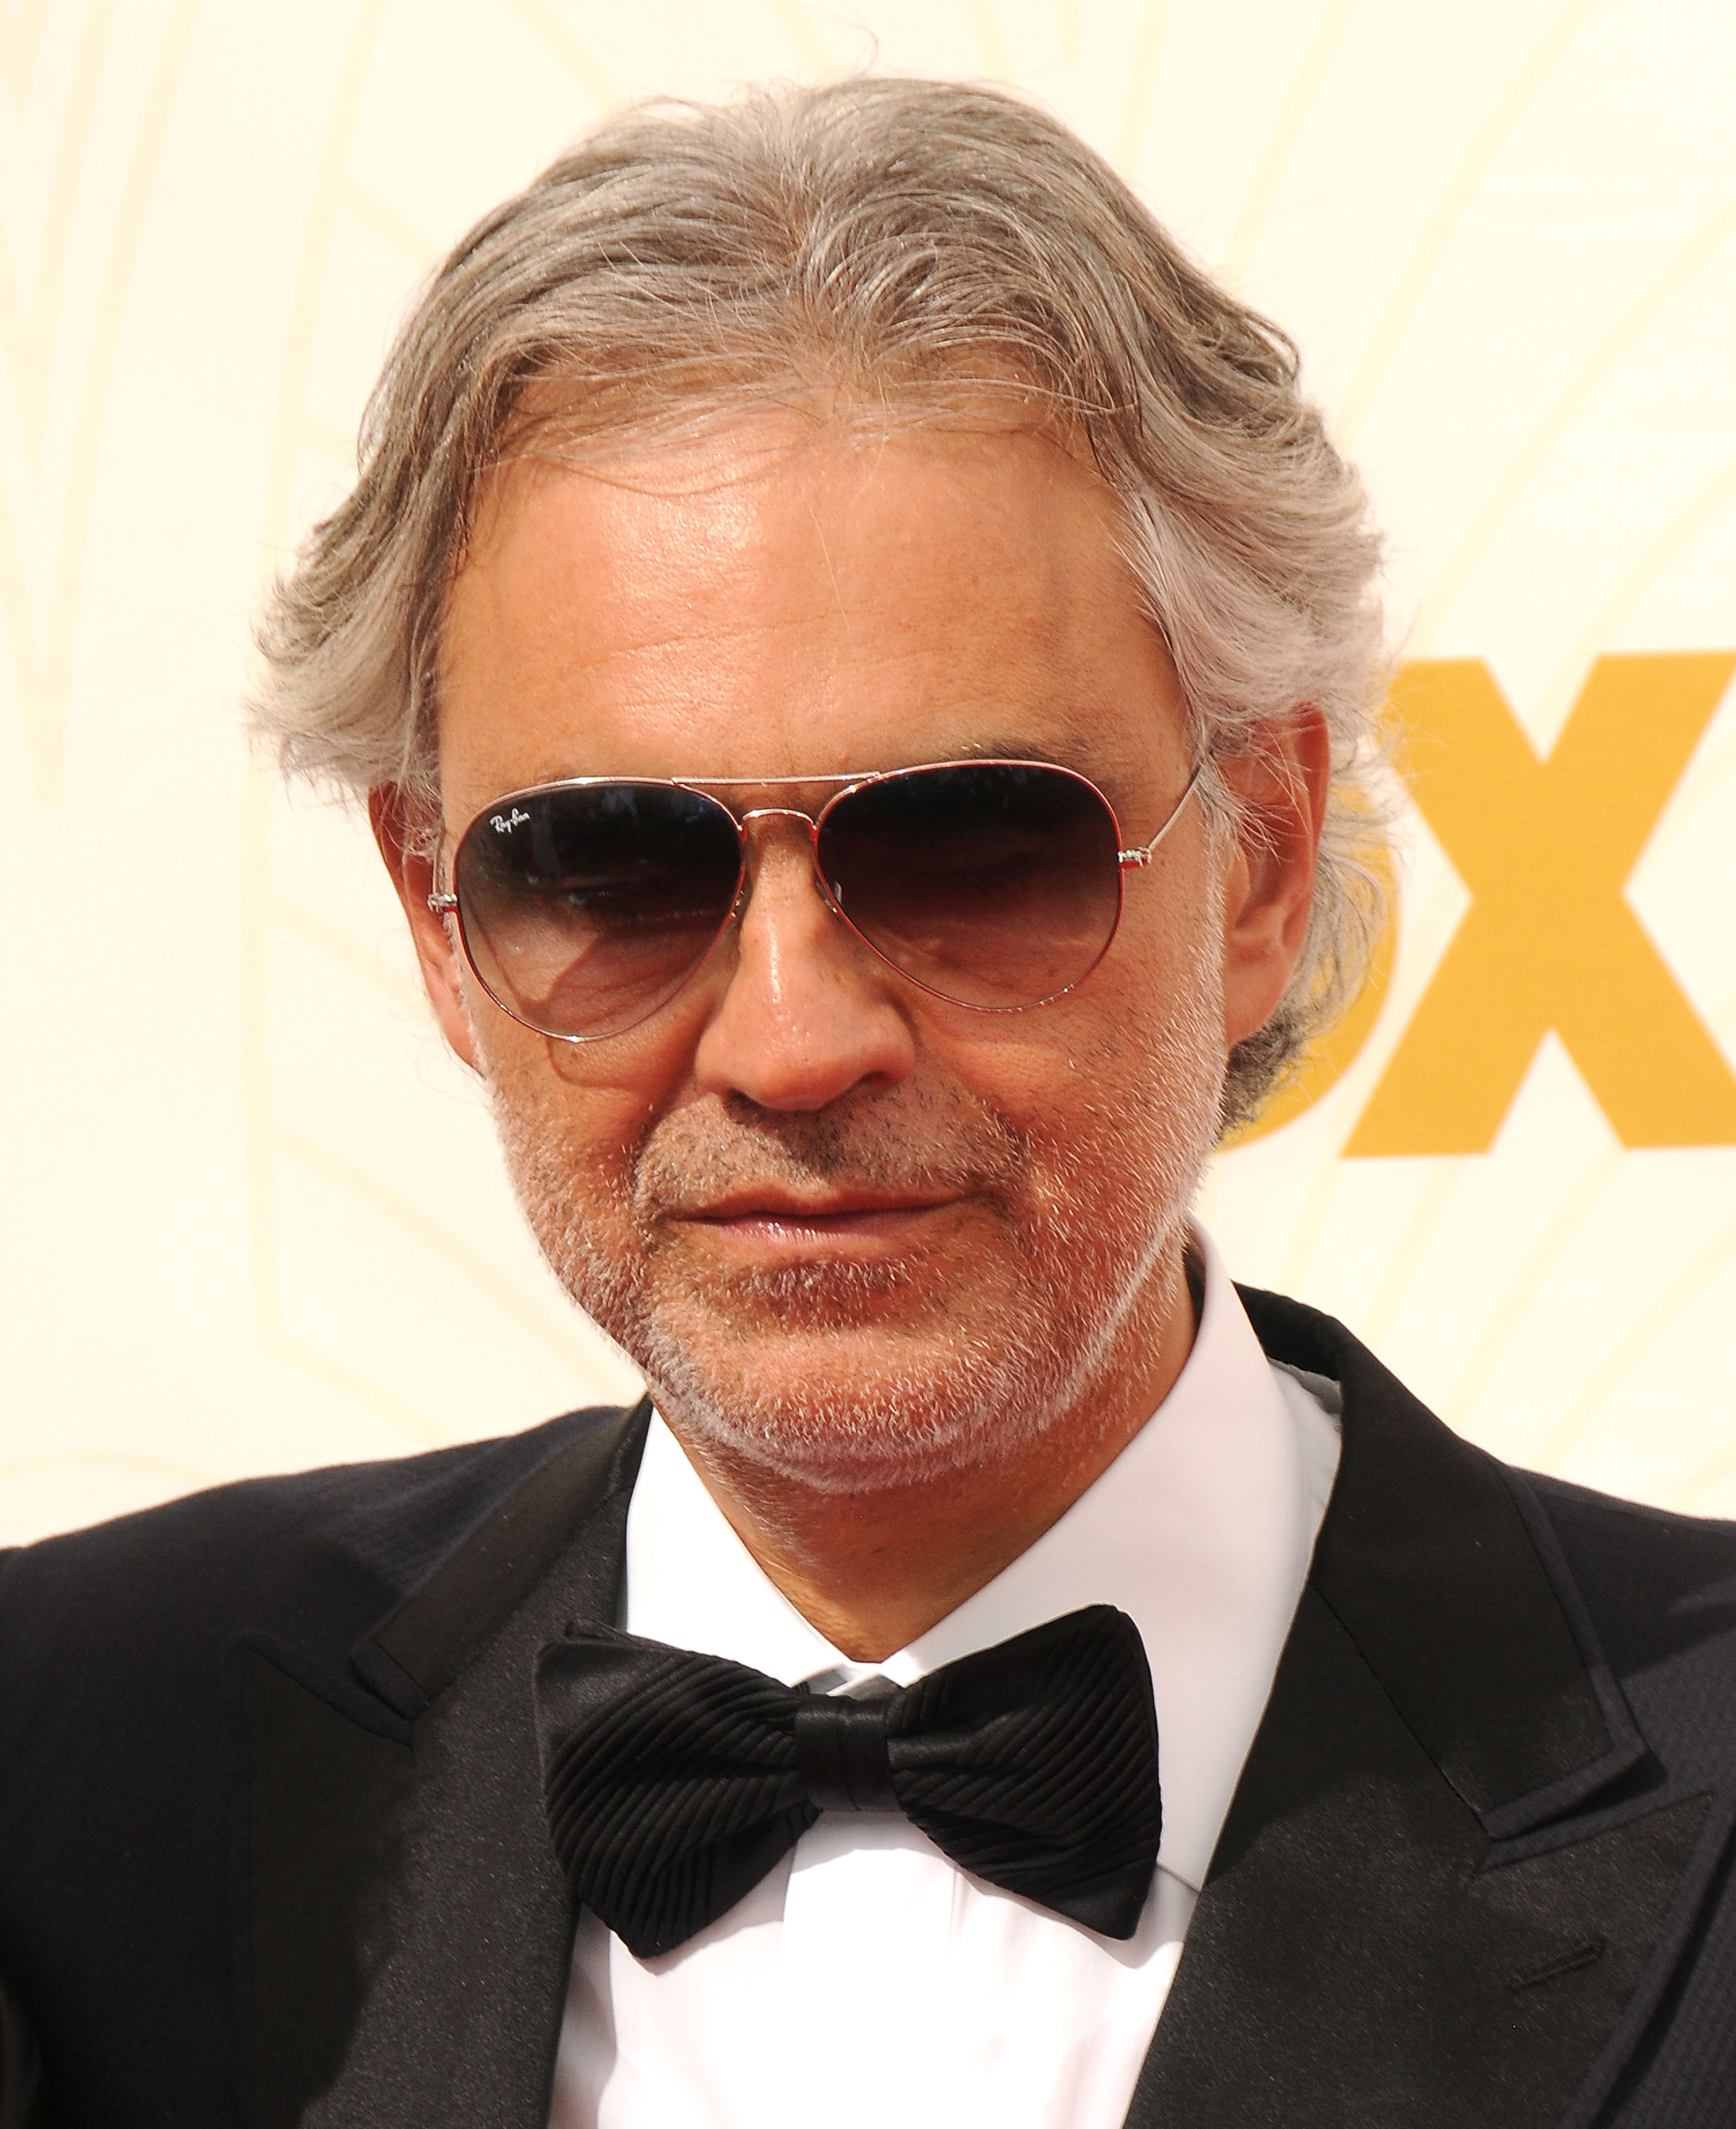 Opera Singer Andrea Bocelli arrives at the 67th Annual Primetime Emmy Awards at the Microsoft Theater in Los Angeles on Sept. 20, 2015. (Barry King—Getty Images)